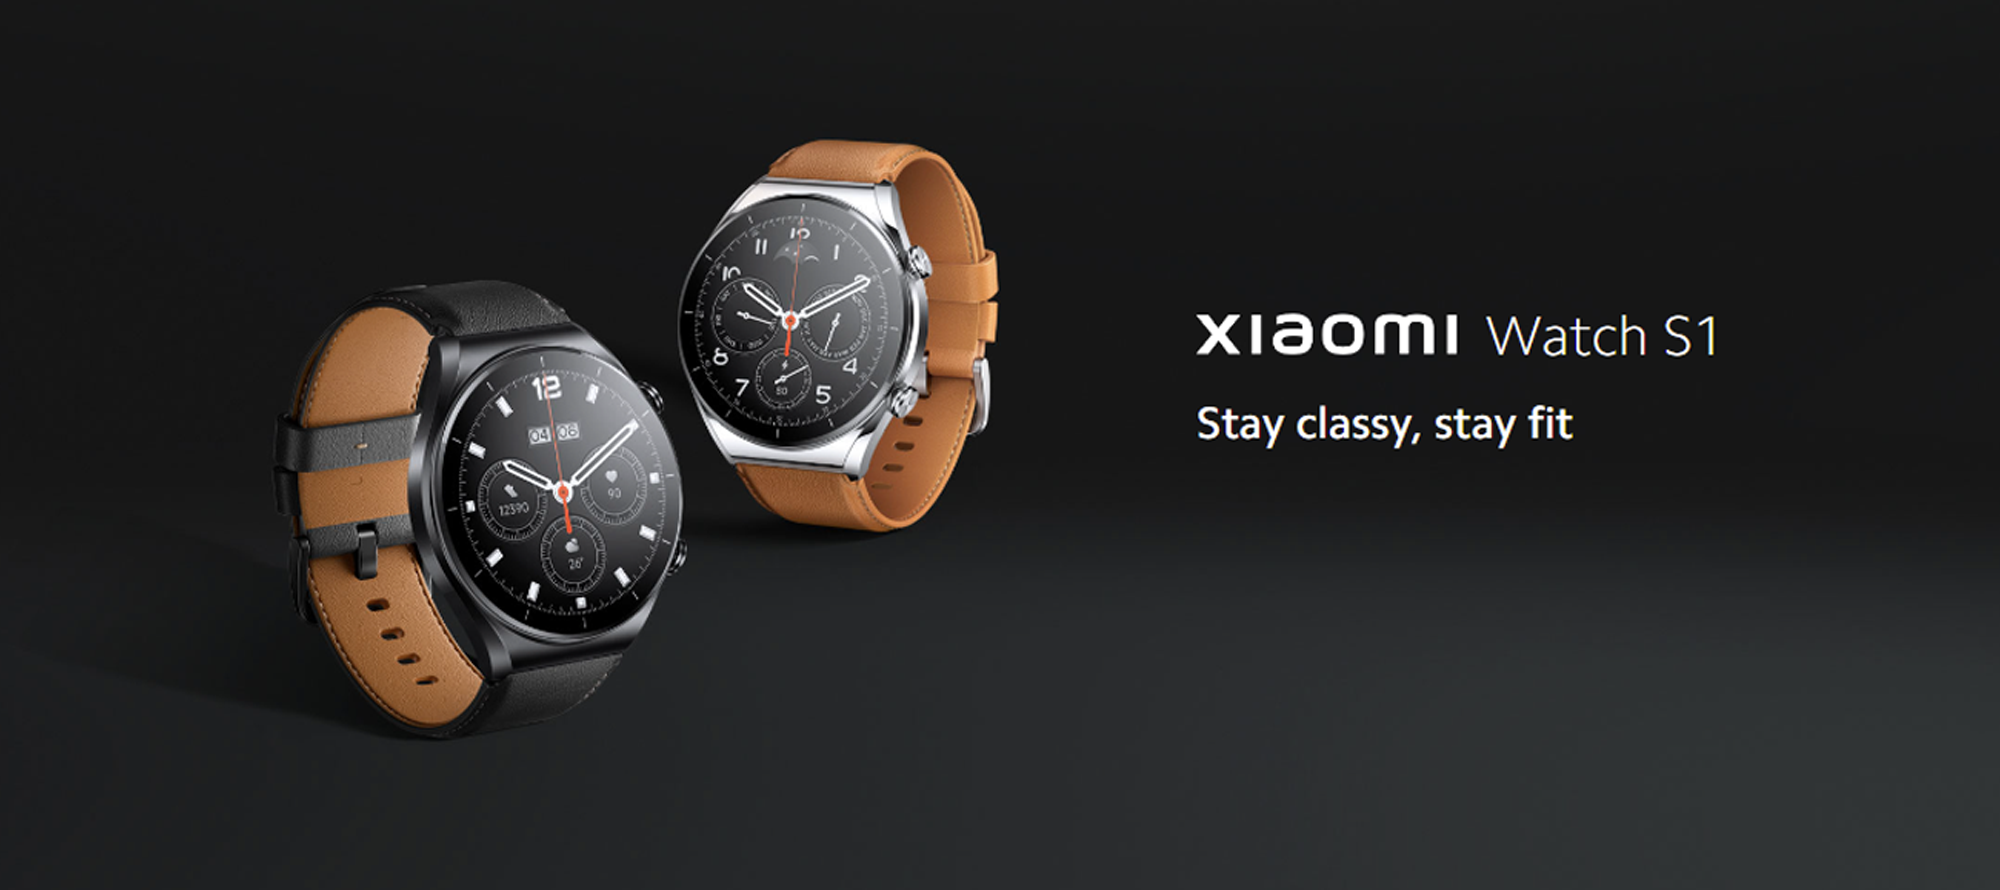 Xiaomi Watch S1 Silver- 1.43 Inch Touch Screen AMOLED HD Display, 12 Days Battery Life, Gps, 117 Fitness Modes